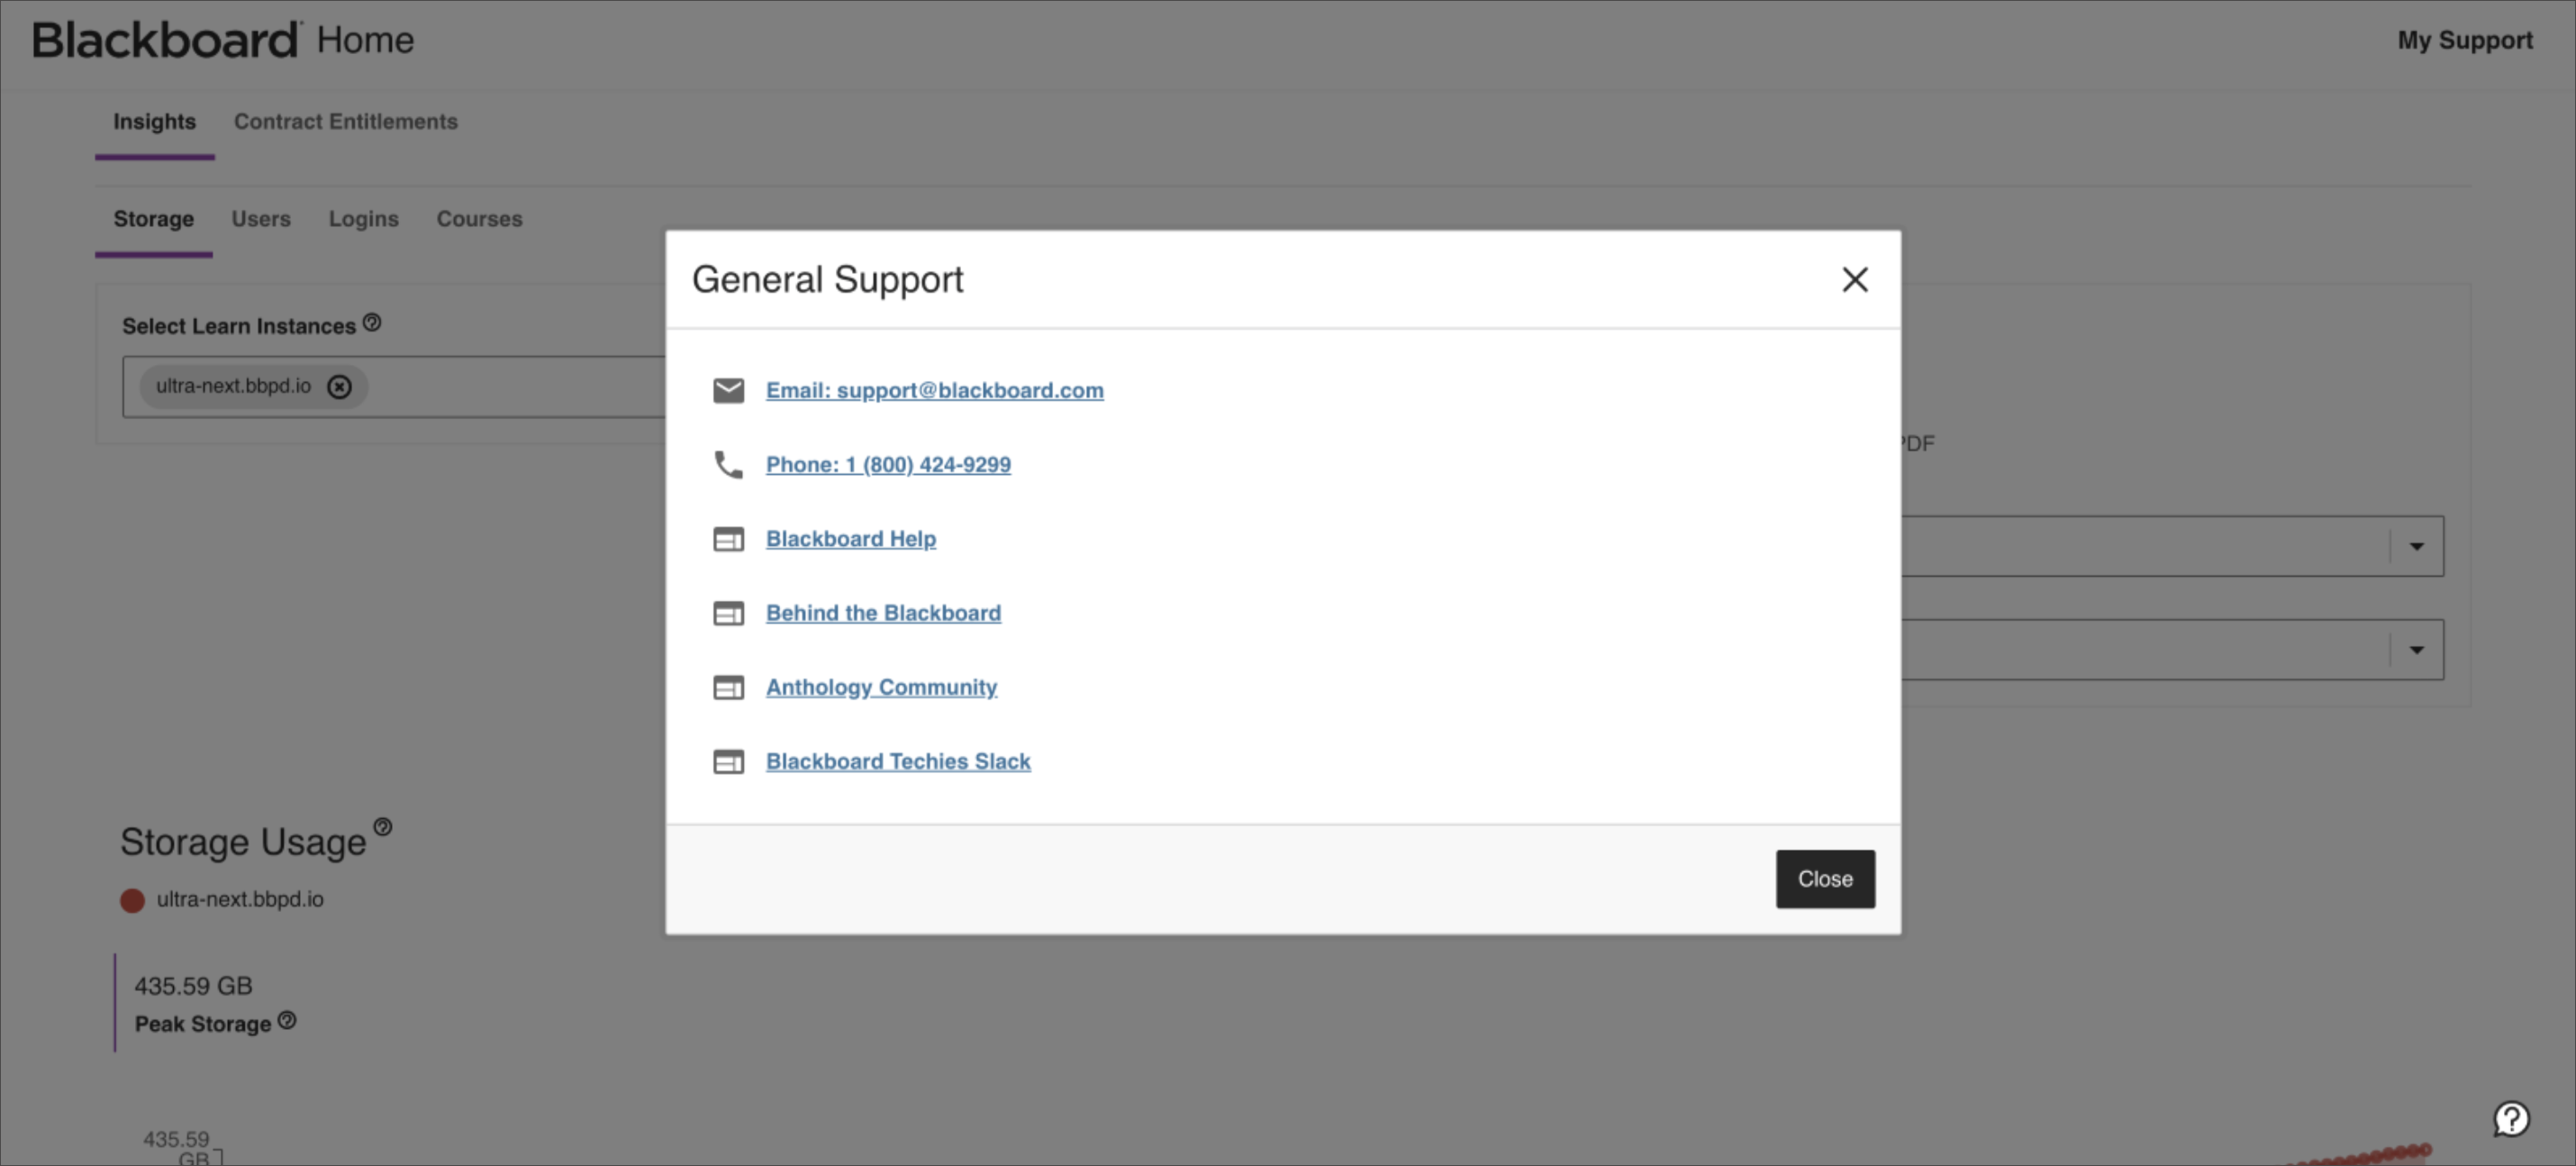 General Support menu view with more help options within the Blackboard Home page